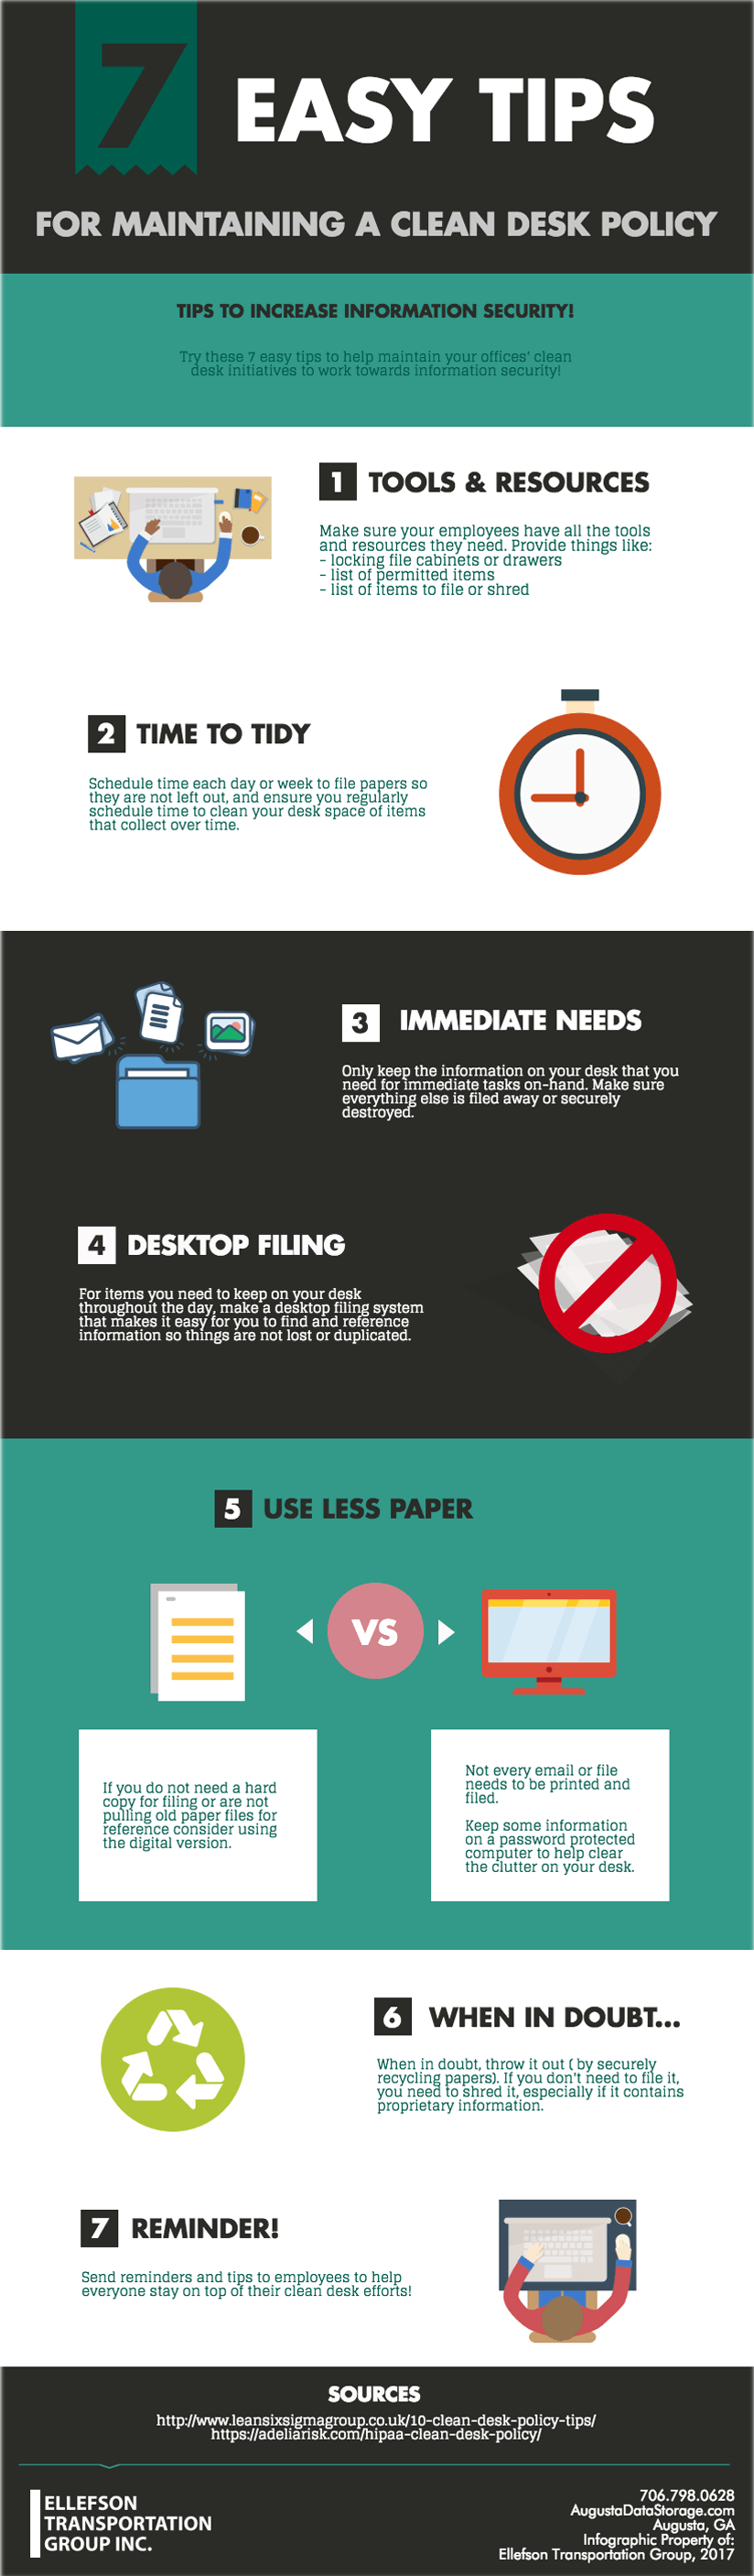 https://www.augustadatastorage.com/wp-content/uploads/2017/08/ClearTheClutter_Infographic.png